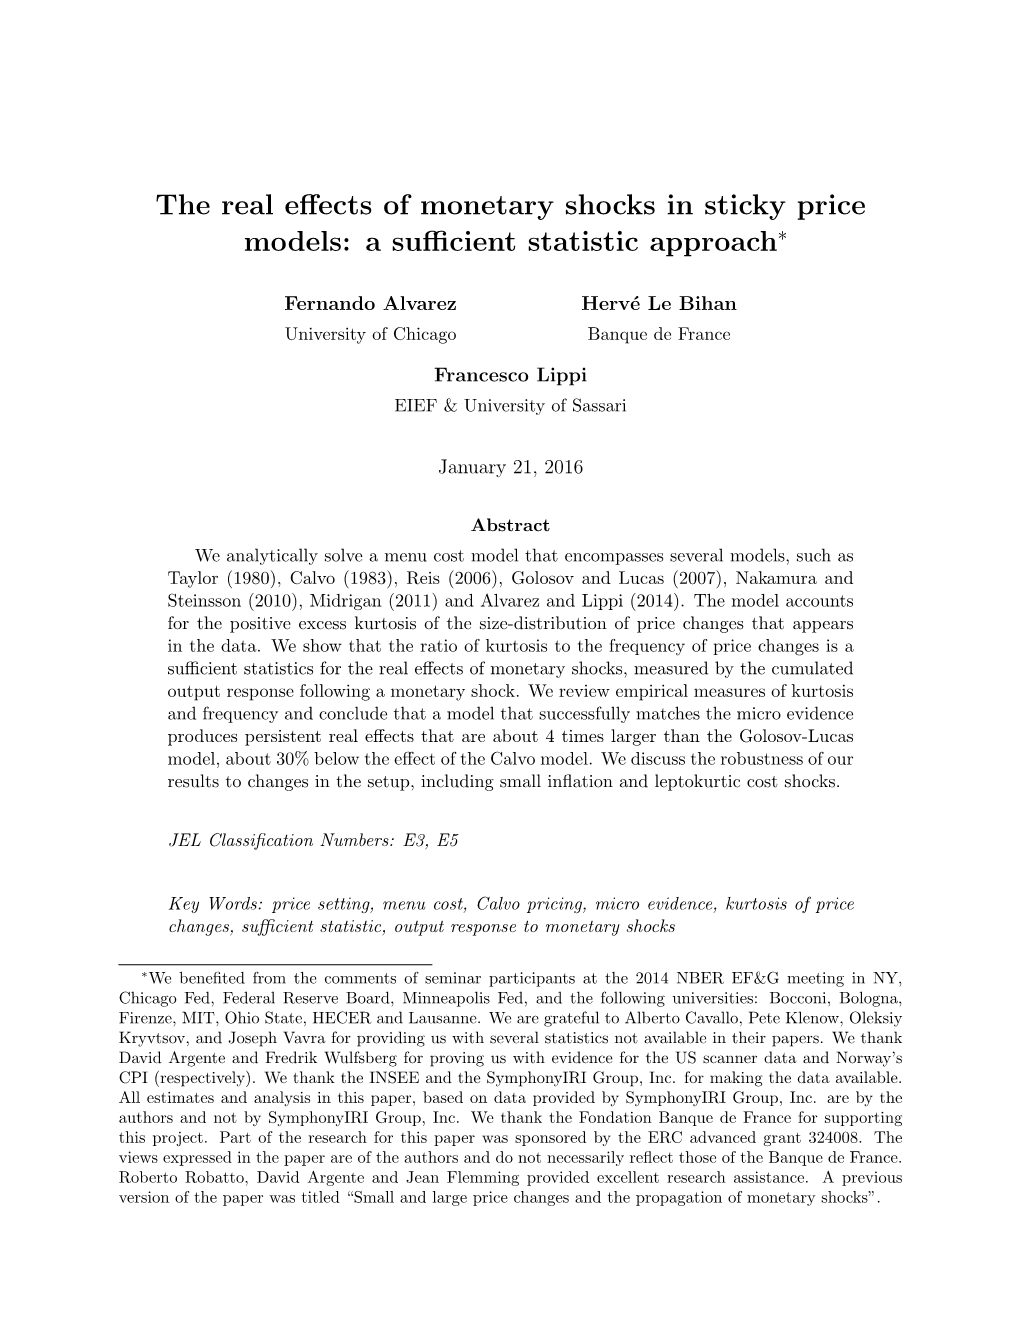 The Real Effects of Monetary Shocks in Sticky Price Models: a Sufficient